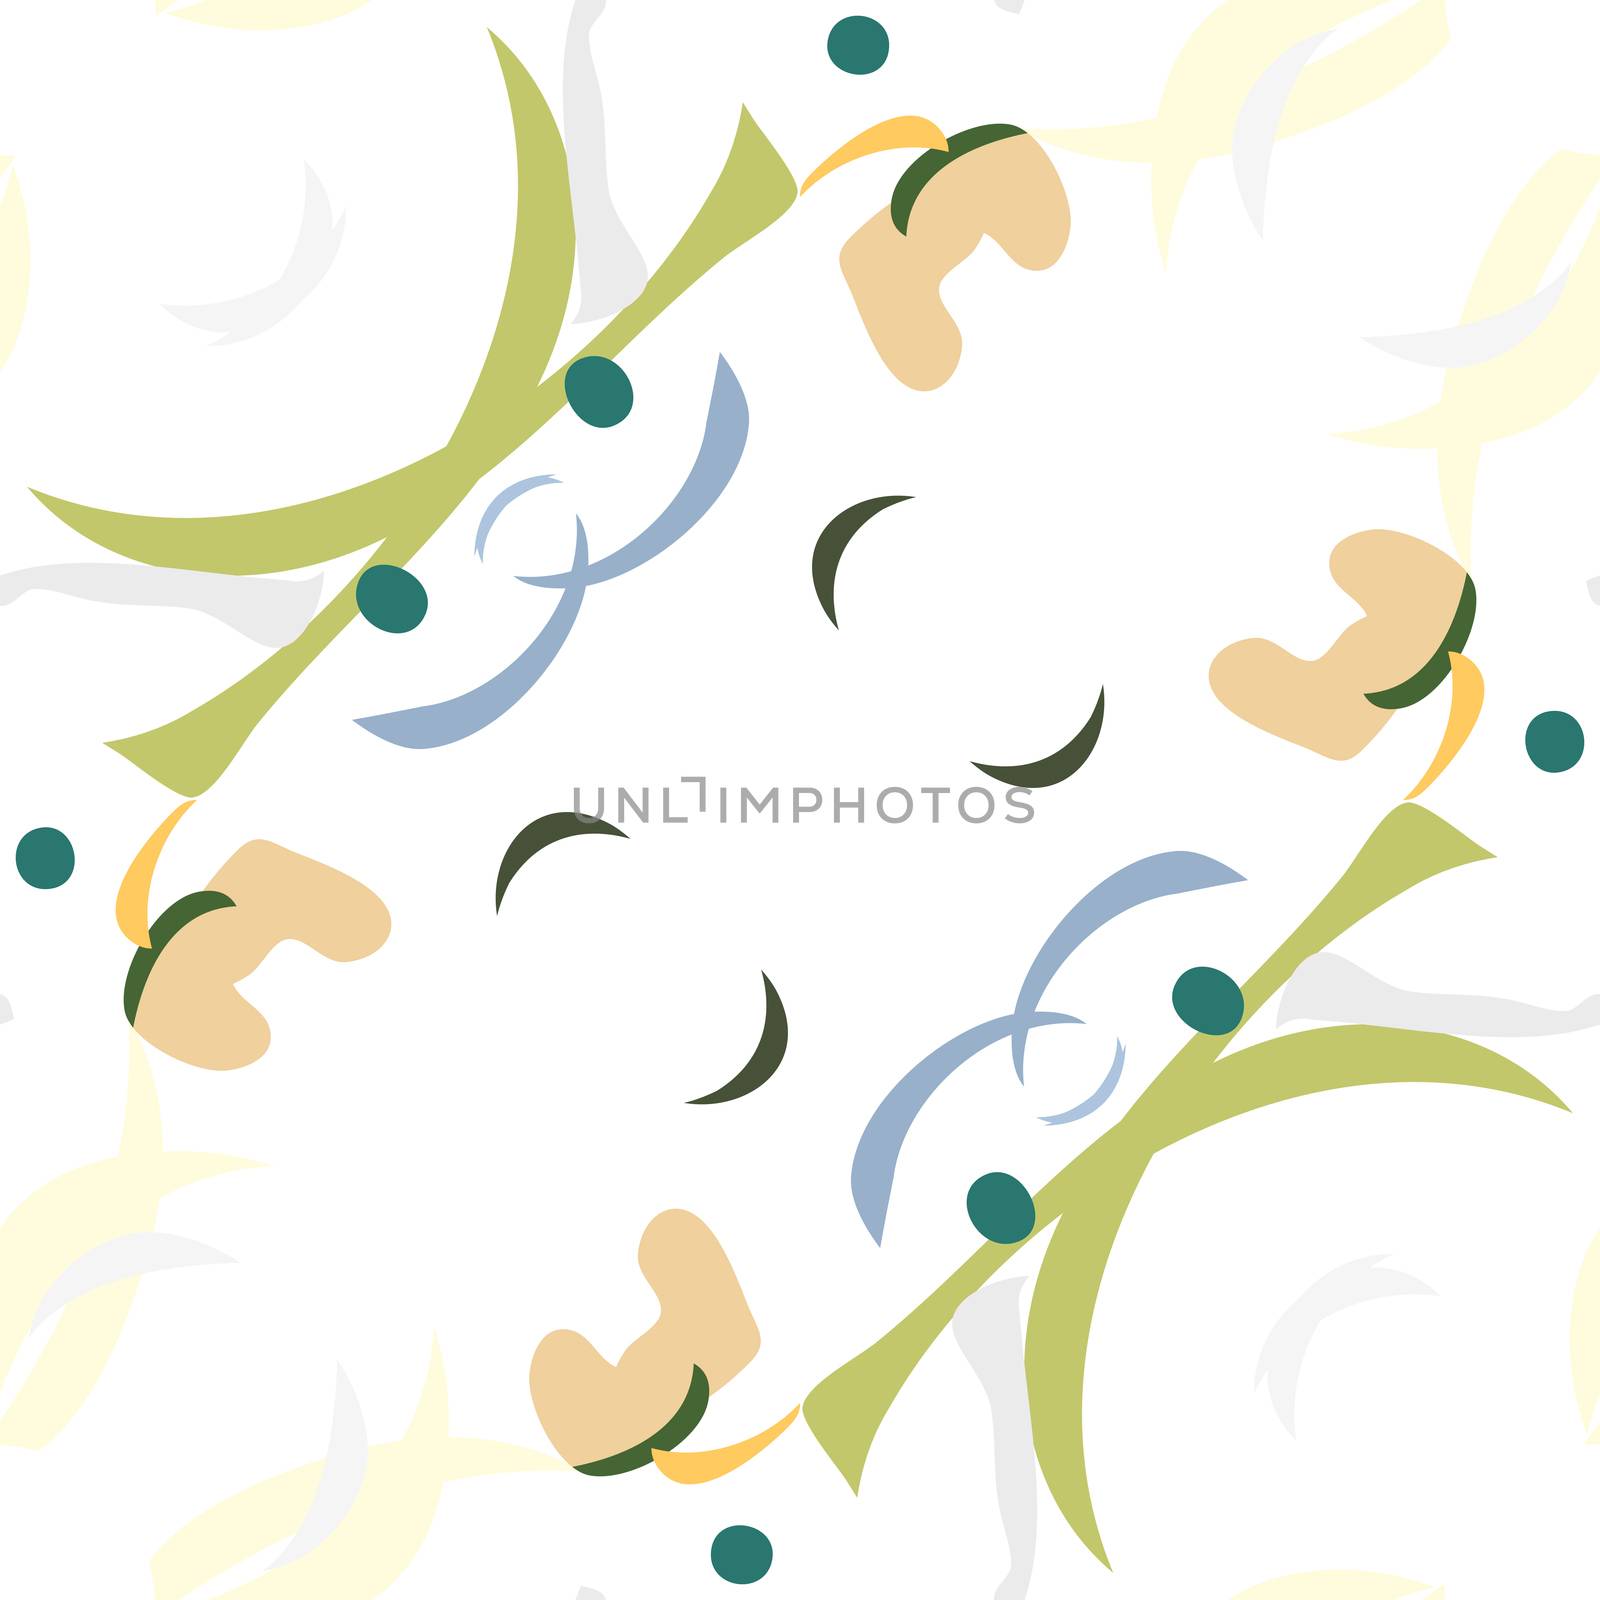 Seamless organic pattern of green and blue shapes